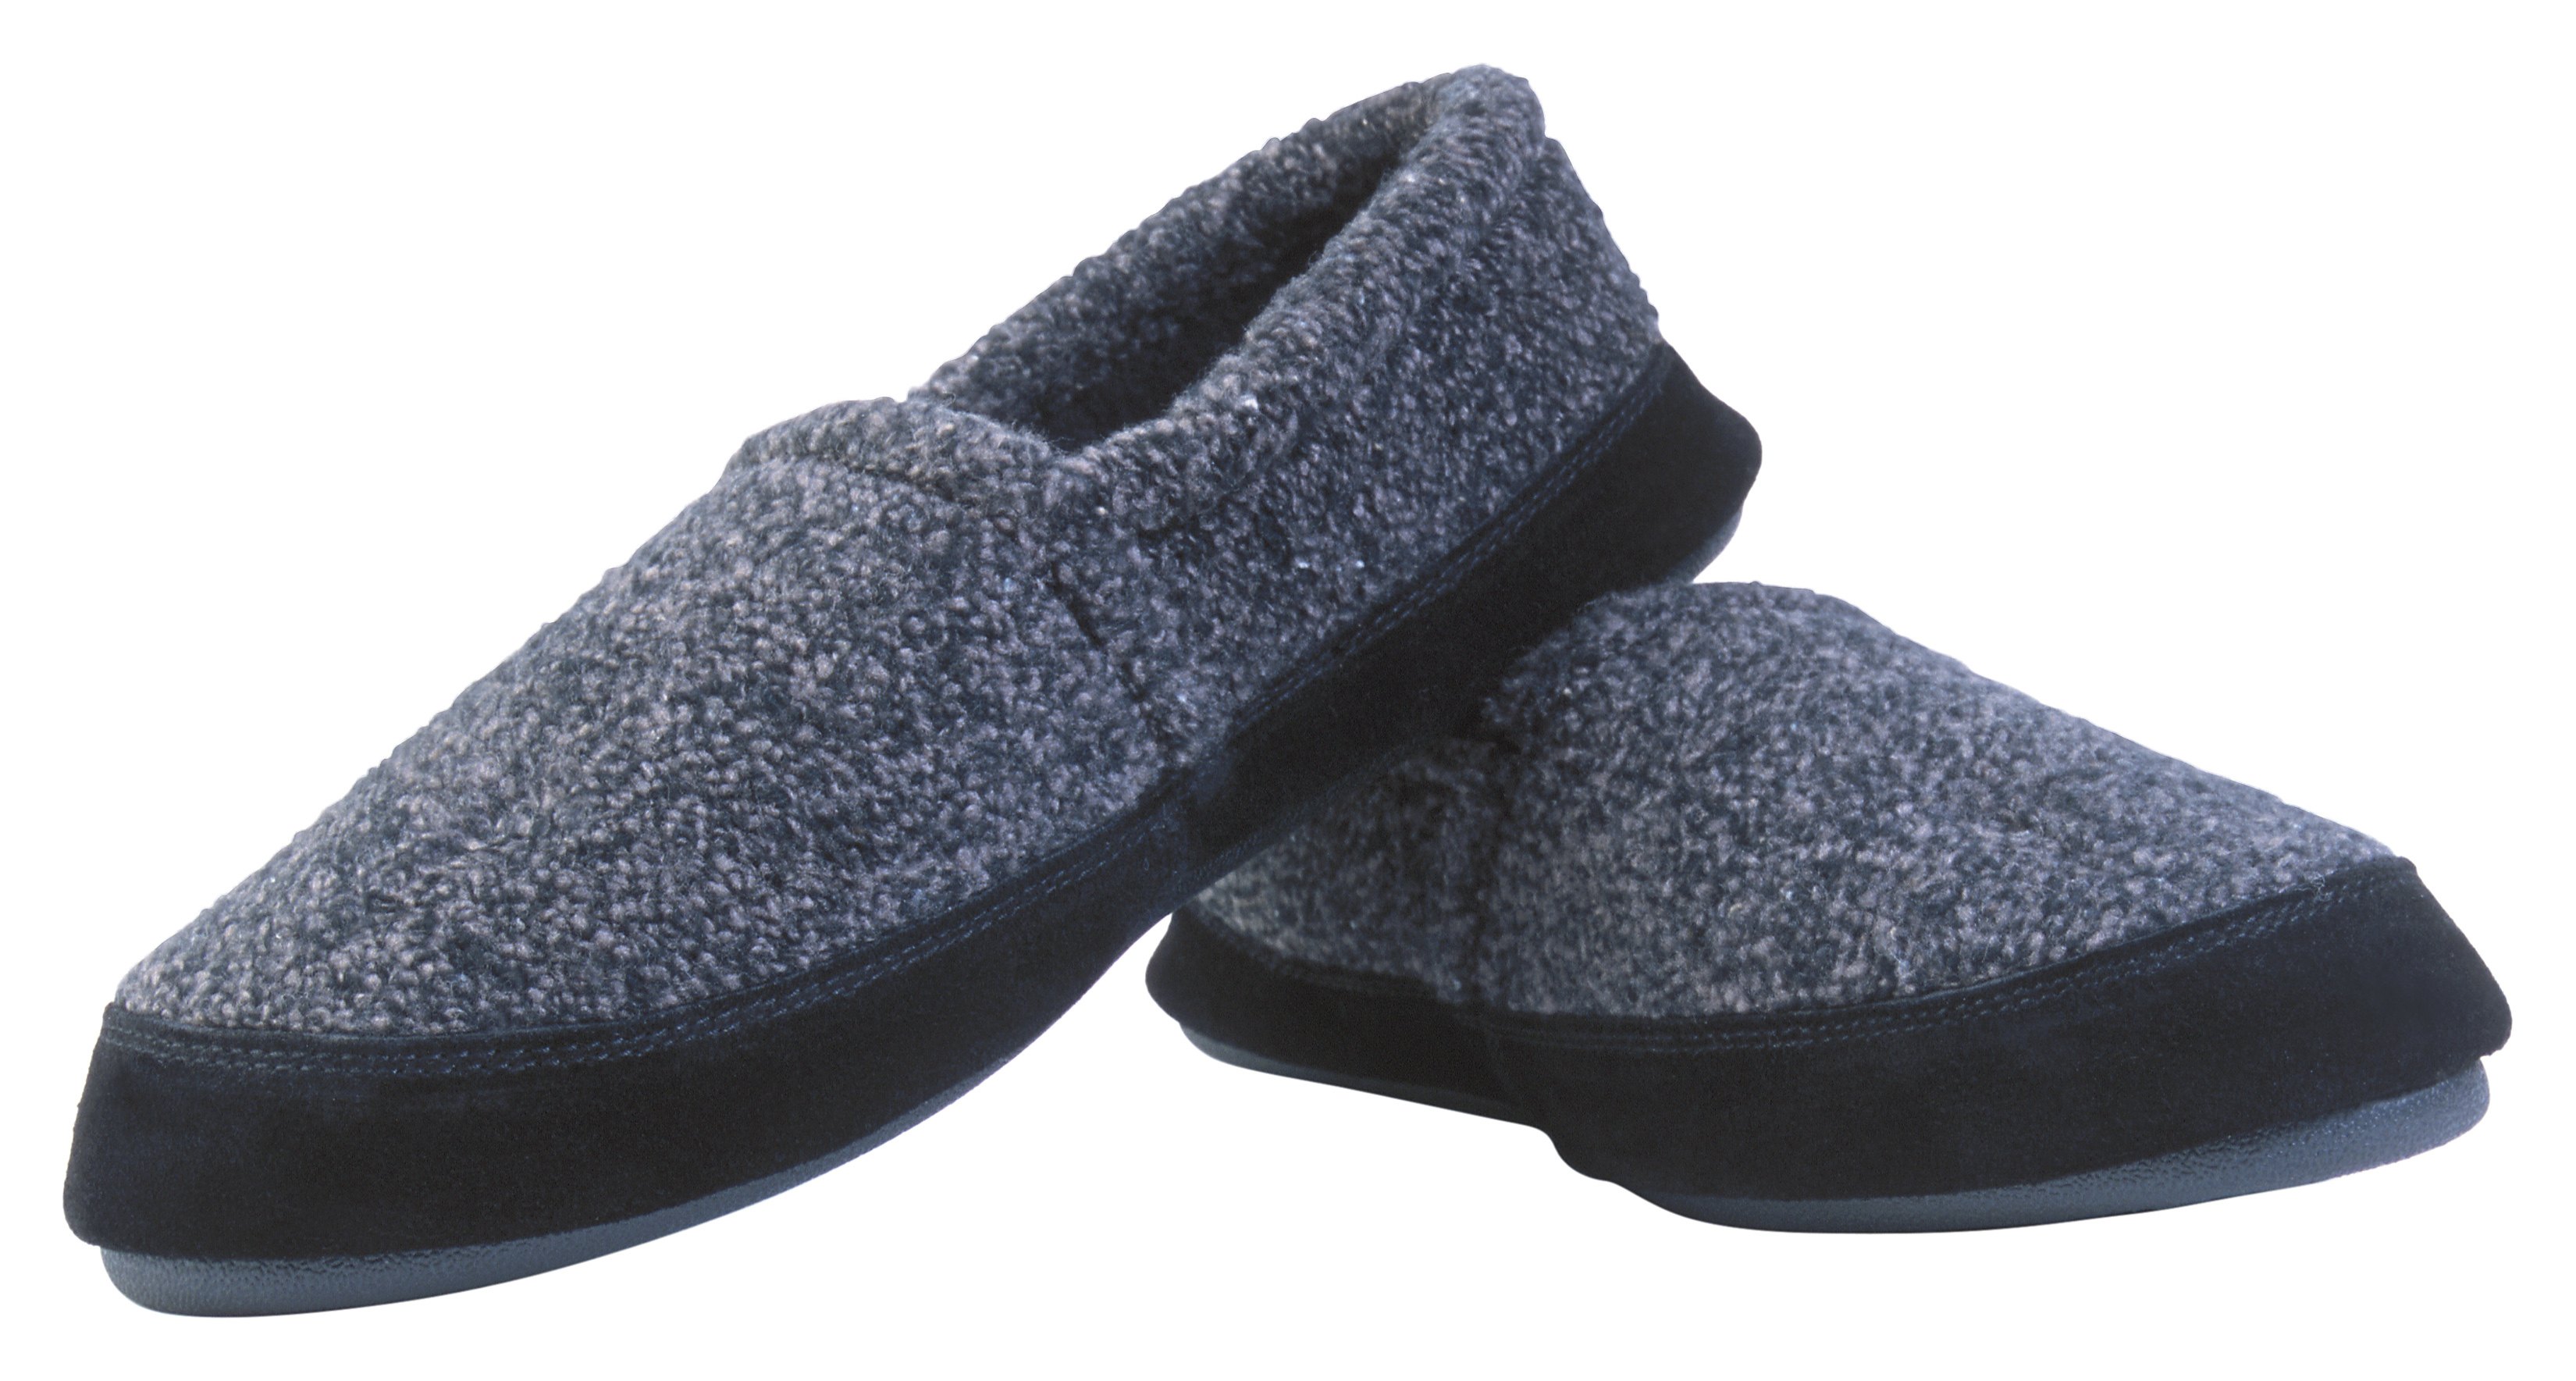 How to Make Wool Slippers Smell Good | eHow